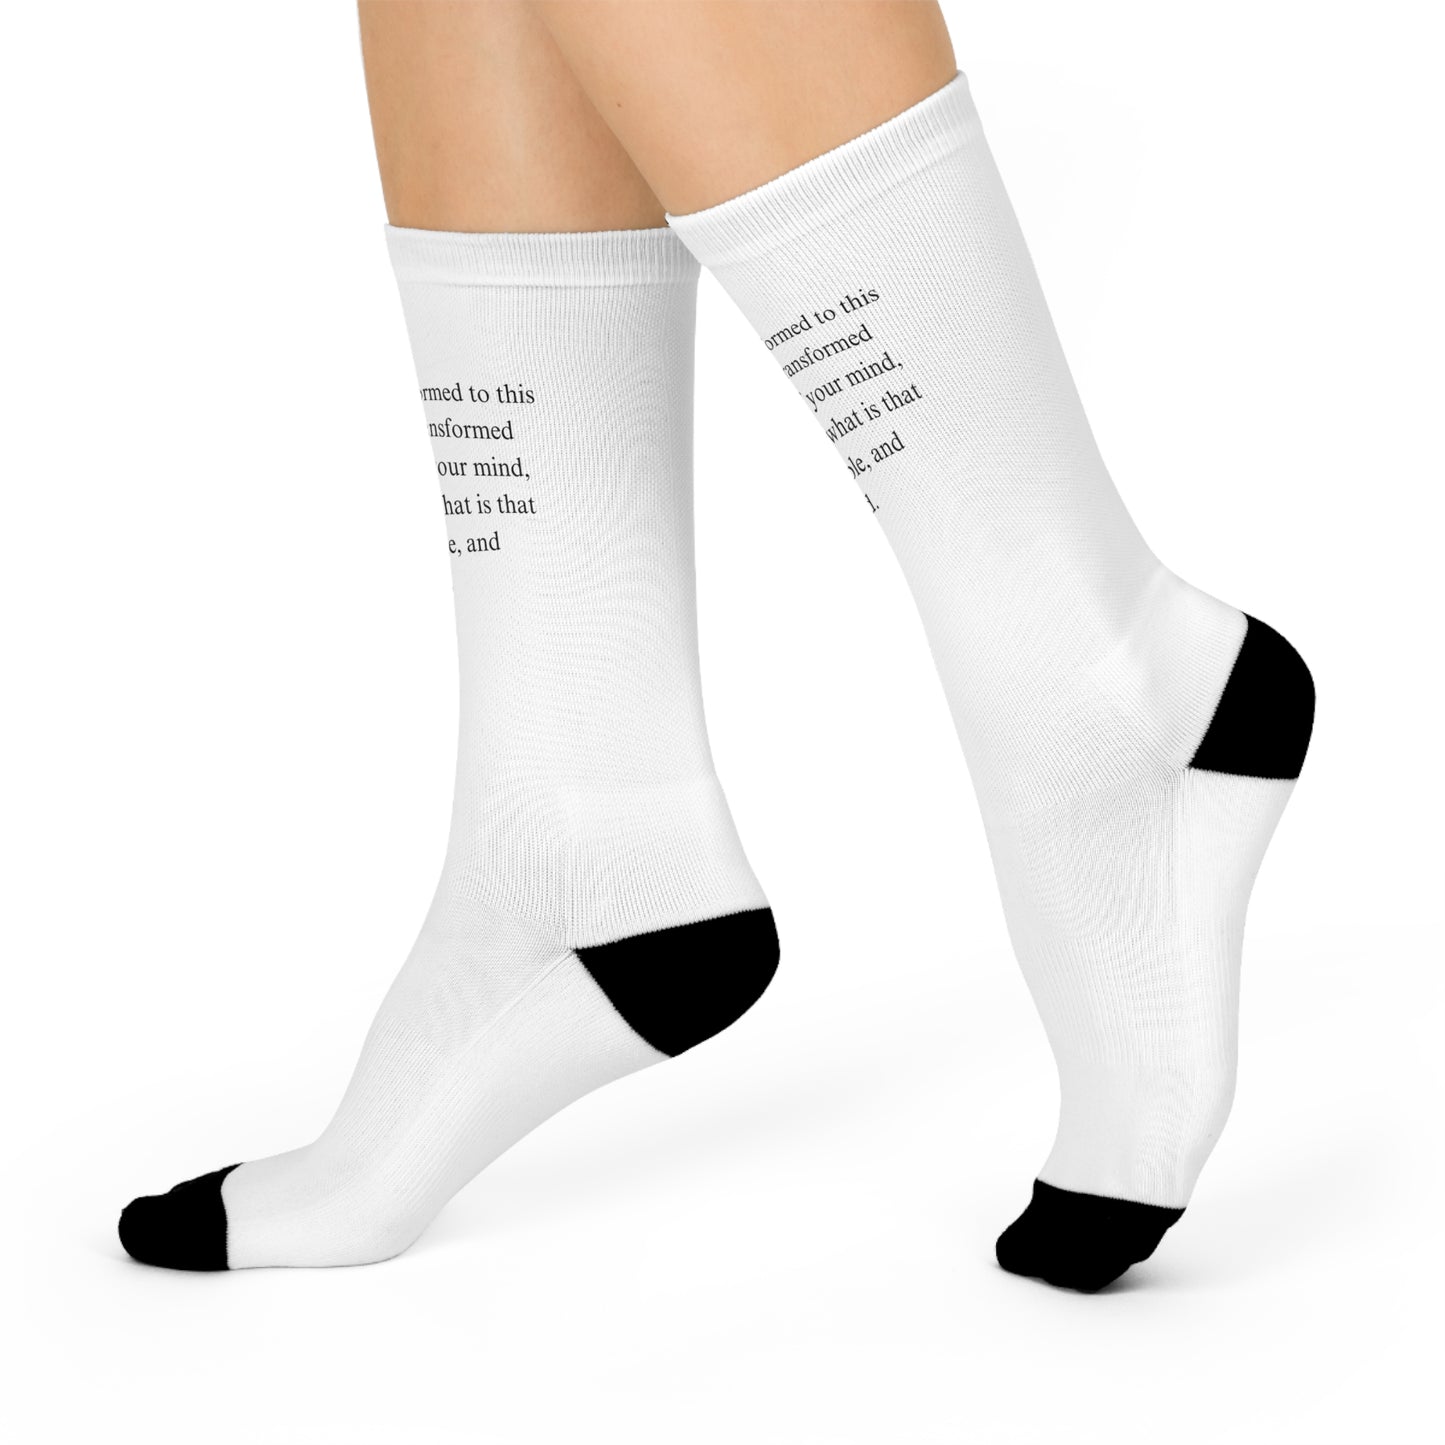 ROMANS 12:2, "Be ye transformed by the renewing of your mind" Cushioned Crew Socks